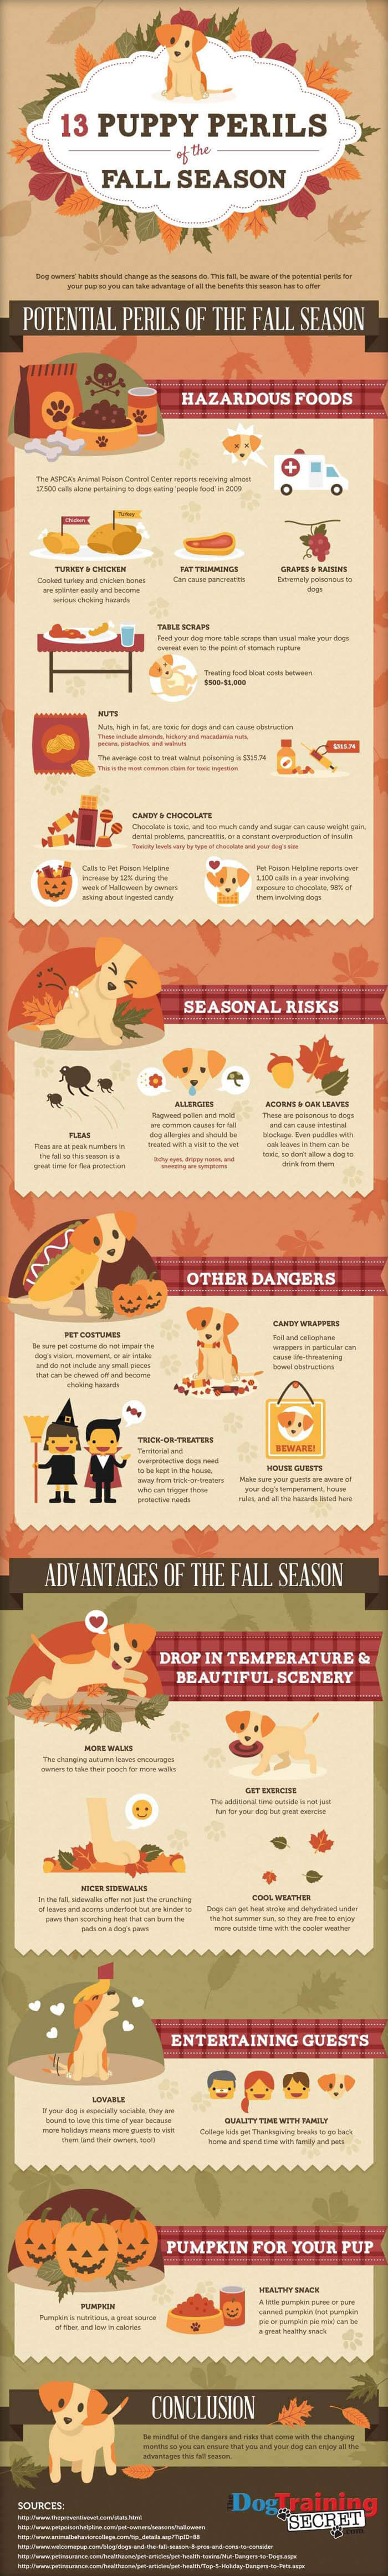 PUPPY INFOGRAPHICS - PRESS TO SEE IN FULLSIZE